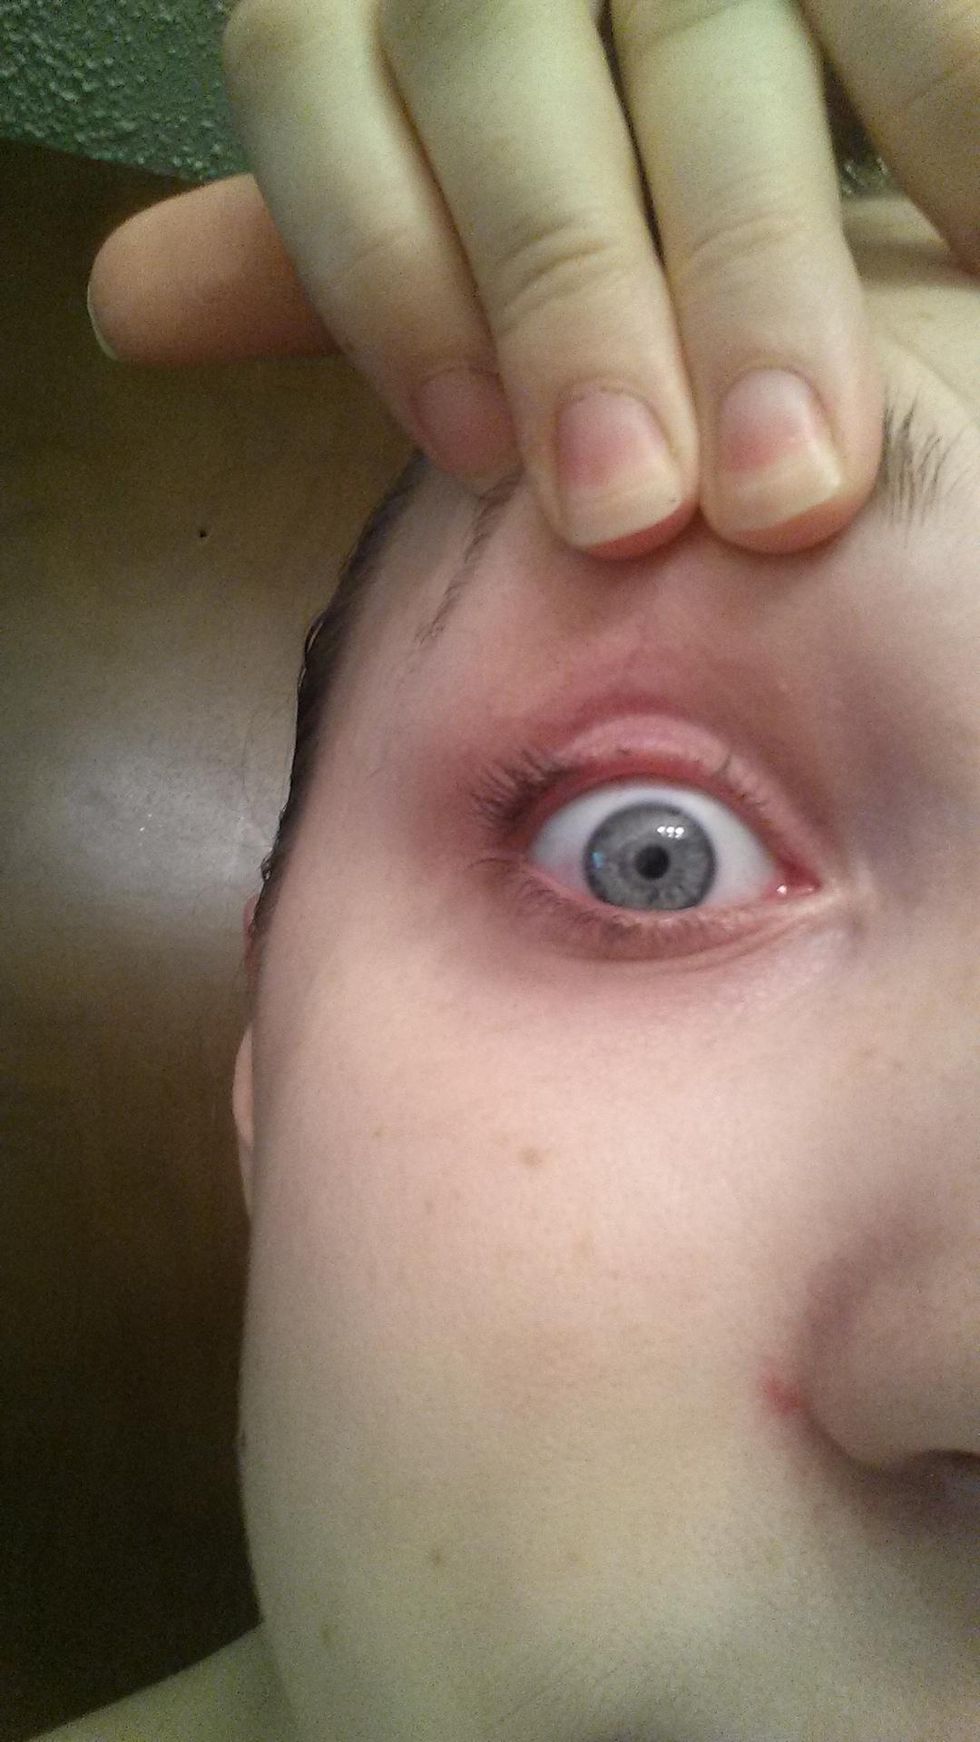 This literal disaster story will make you NEVER want to use an eyelash curler again